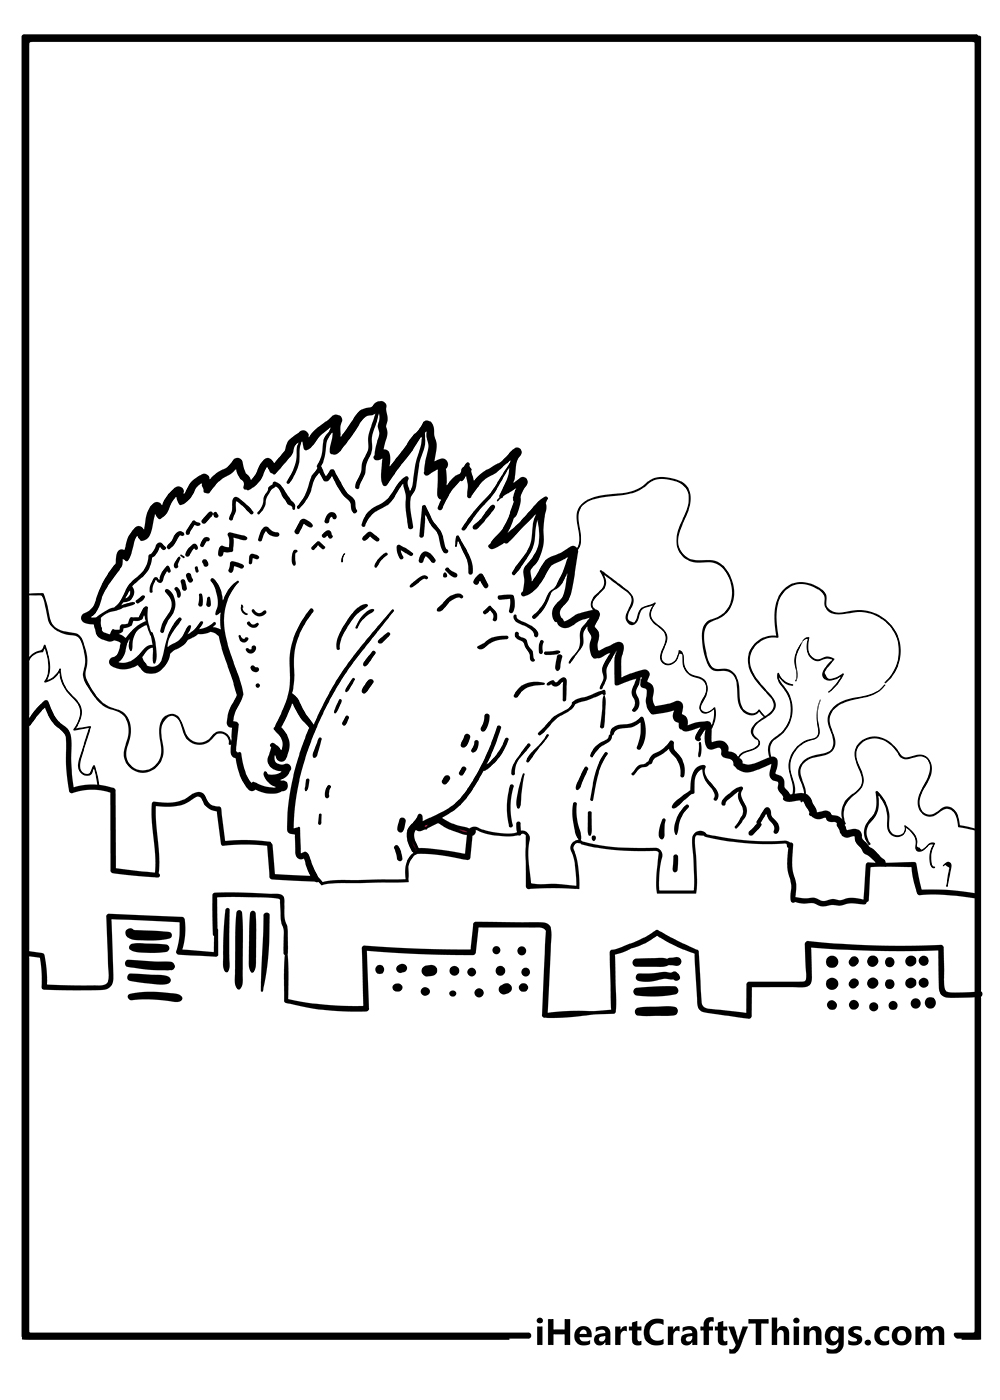 Godzilla Coloring Sheet for children free download